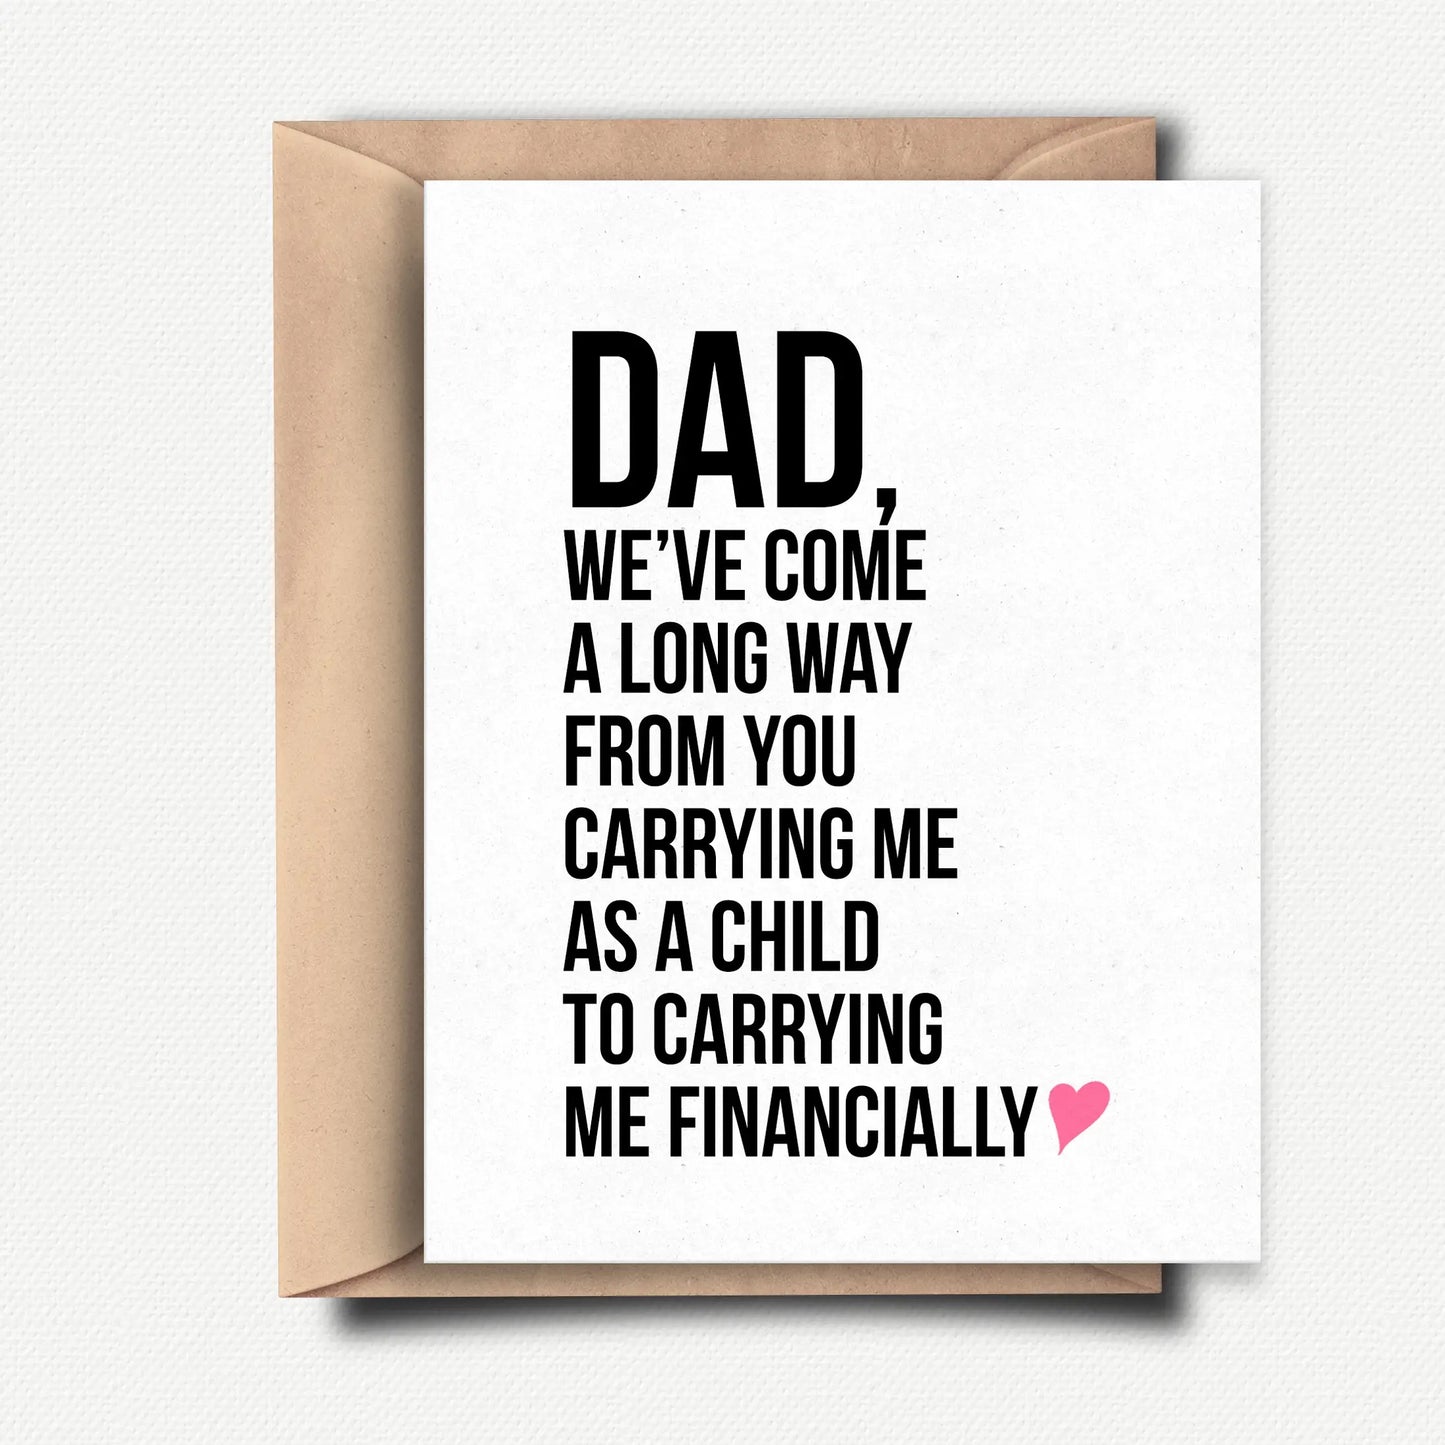 CARRYING MY FINANCIALLY - FUNNY FATHER'S DAY